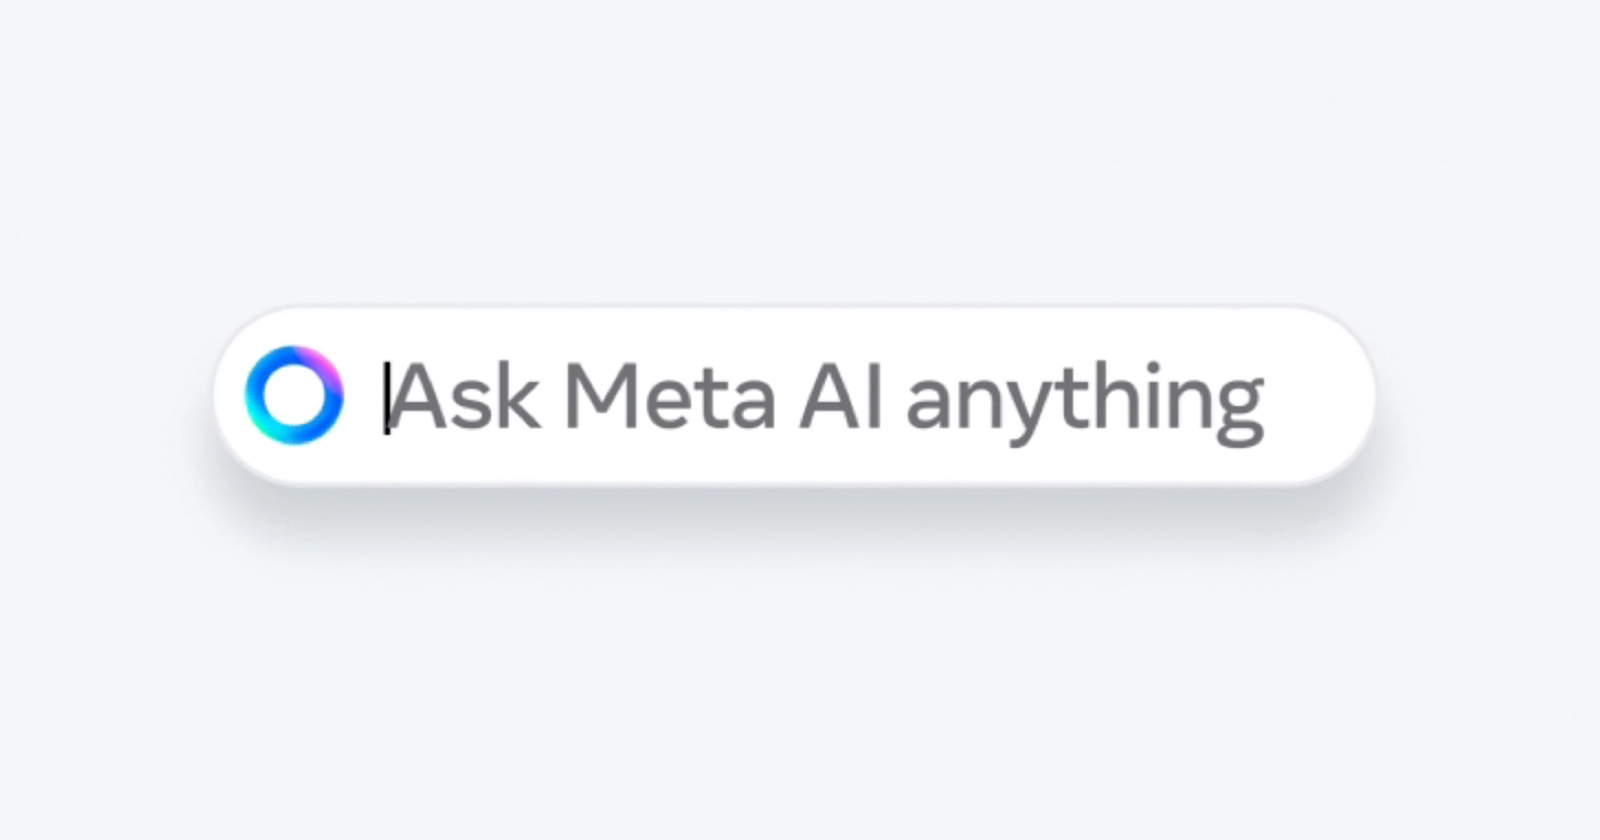 Meta Integrates Google & Bing Search Results Into AI Assistant via @sejournal, @MattGSouthern